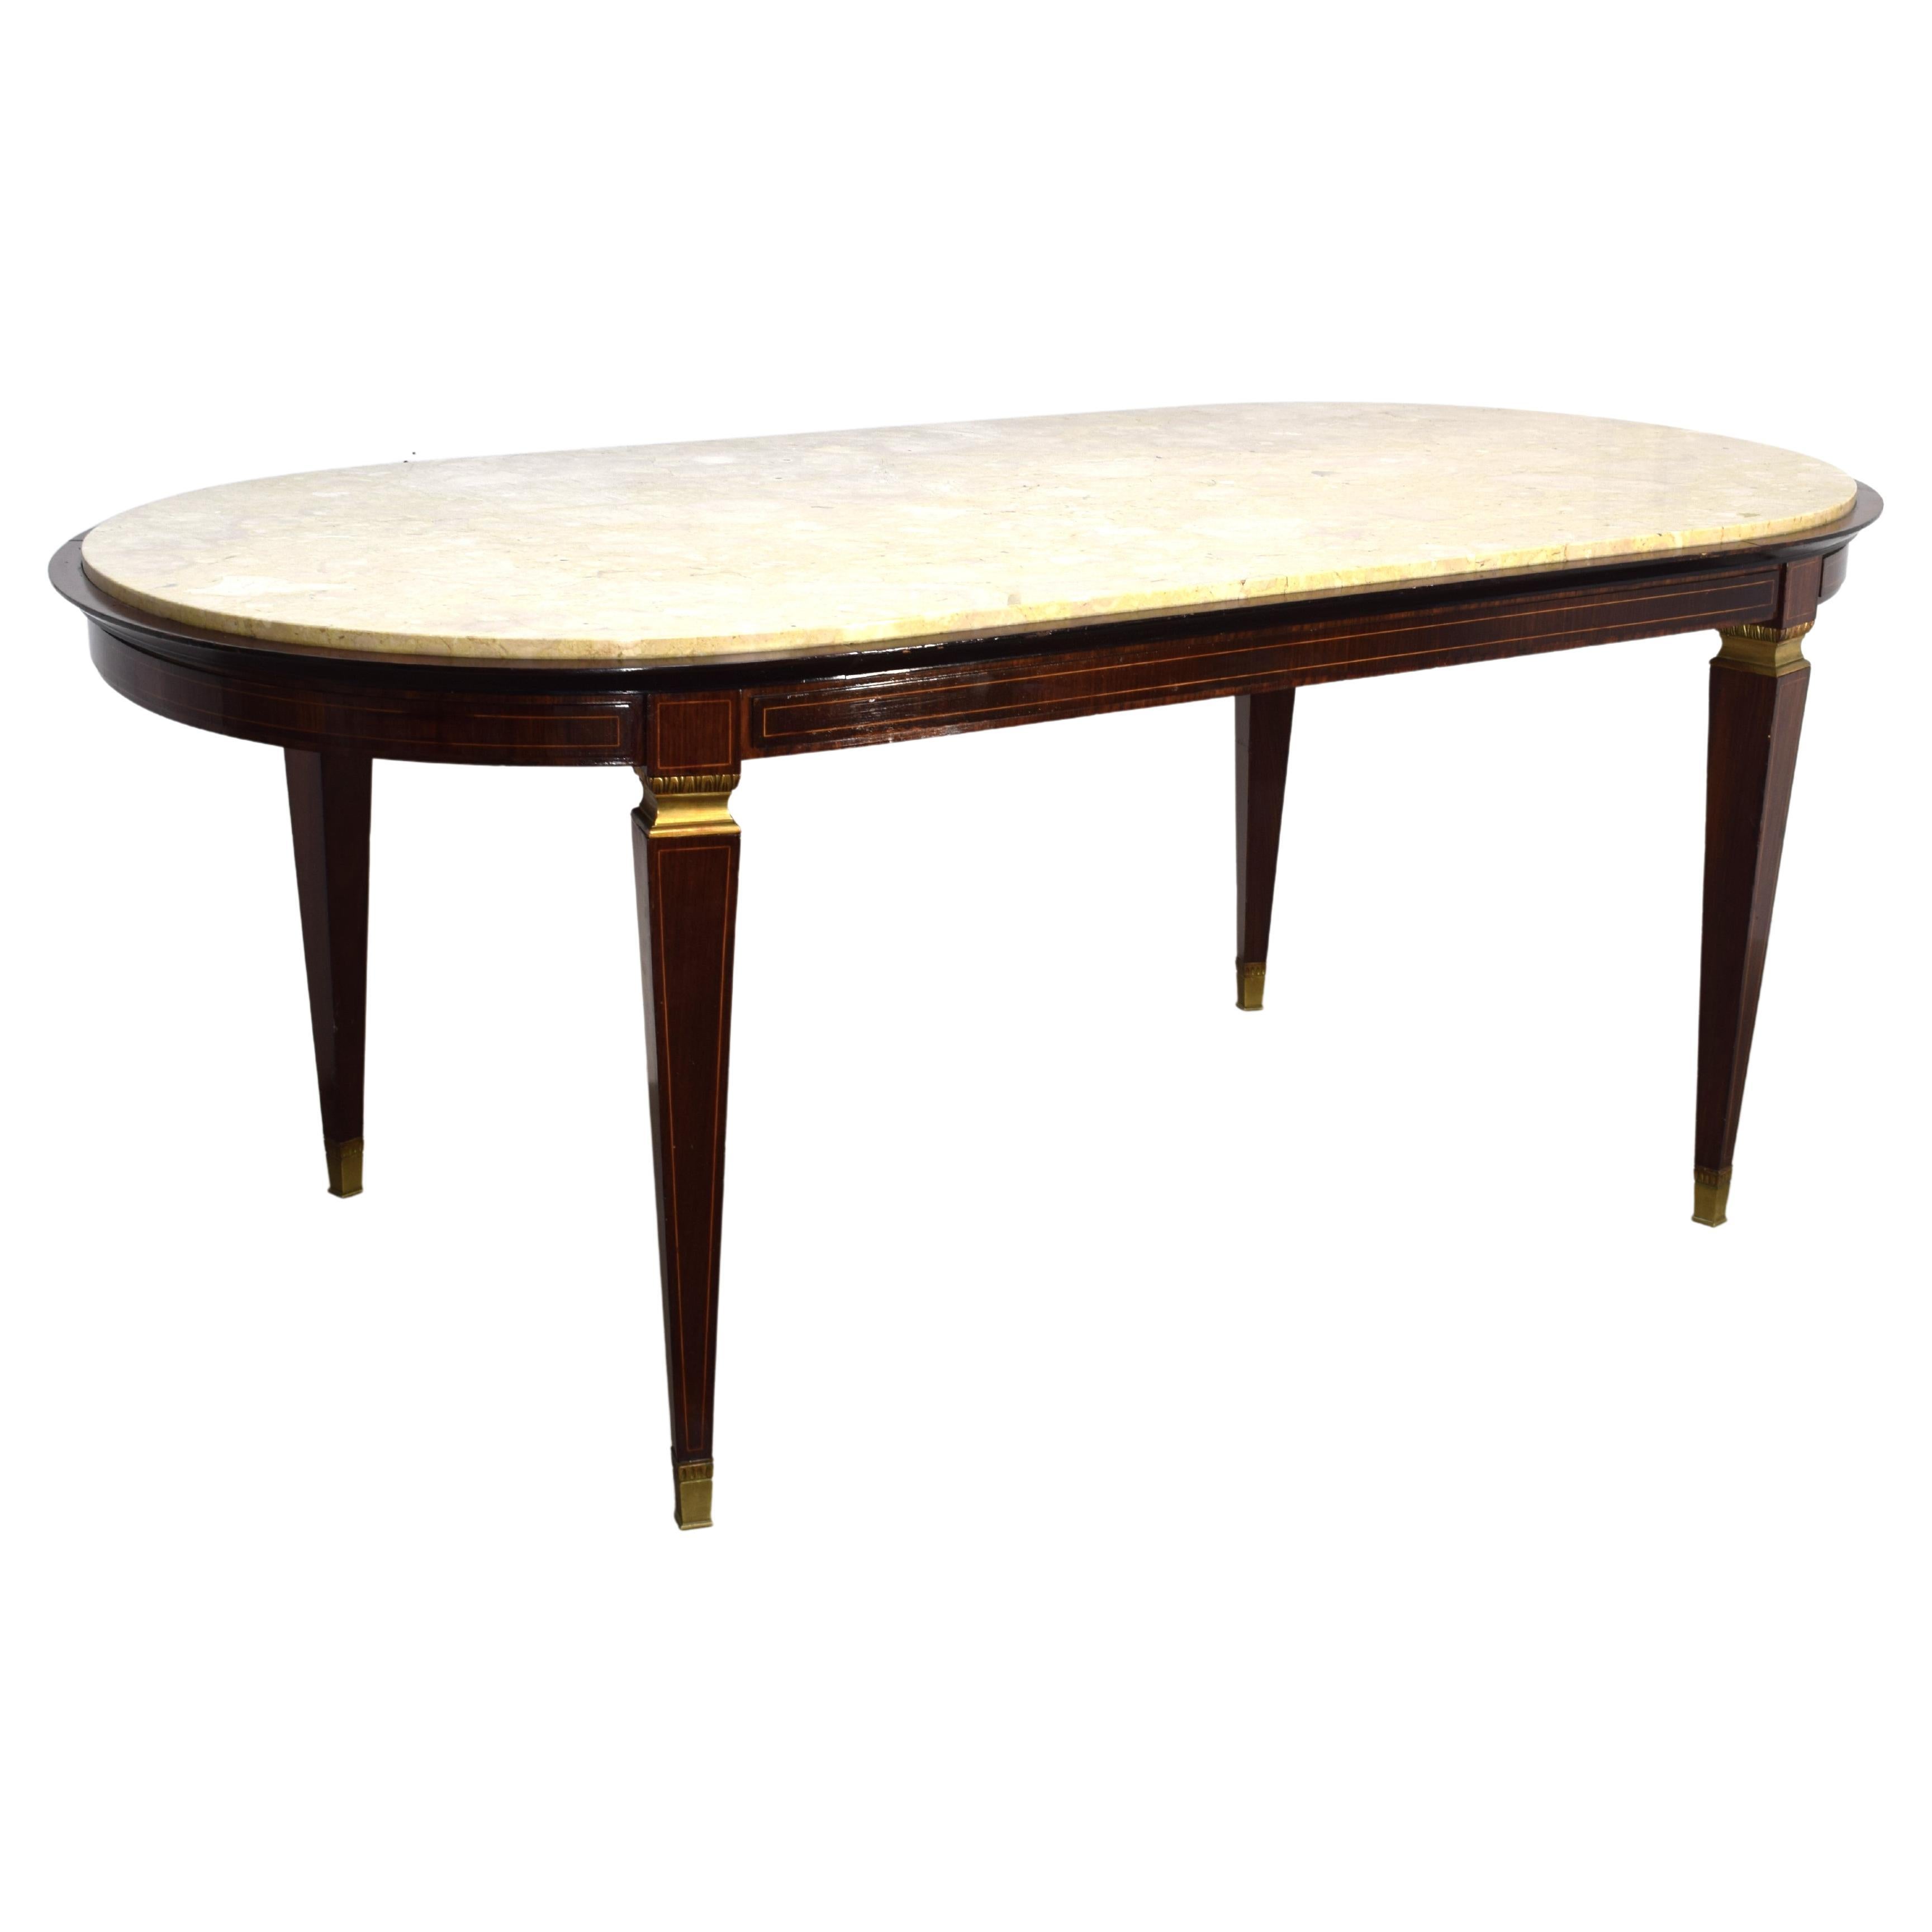 Italian large dining table by Paolo Buffa, 1950s